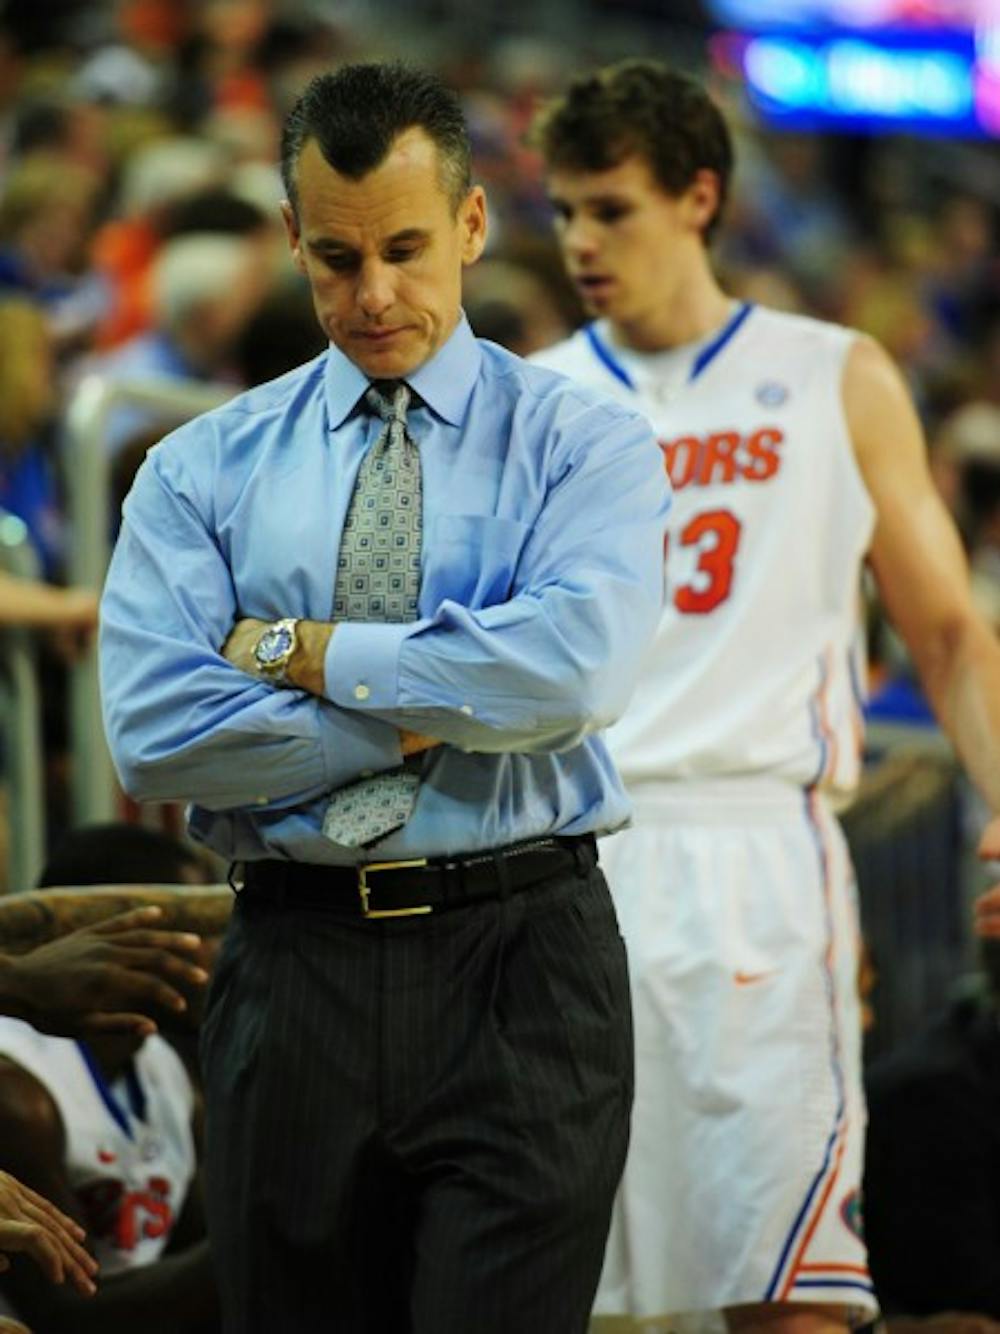 <p>Coach Billy Donovan said the Gators have not had the same intensity on defense since beating FSU on Dec. 22, adding that first-year starters like Erik Murphy (back) are still learning to maintain focus on defense.</p>